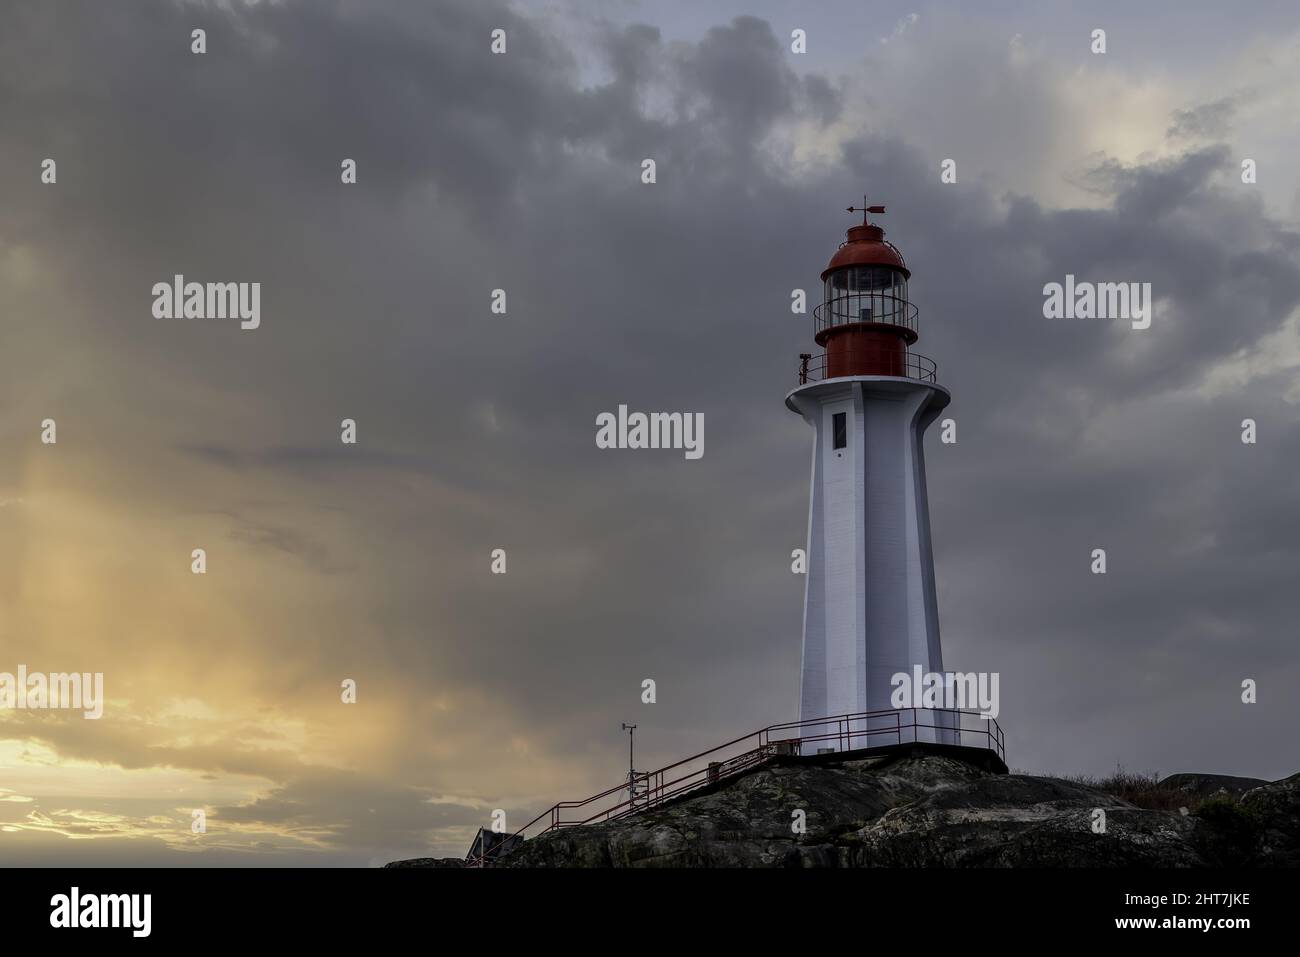 Low angle shot of a lighthouse on a cloudy day Stock Photo